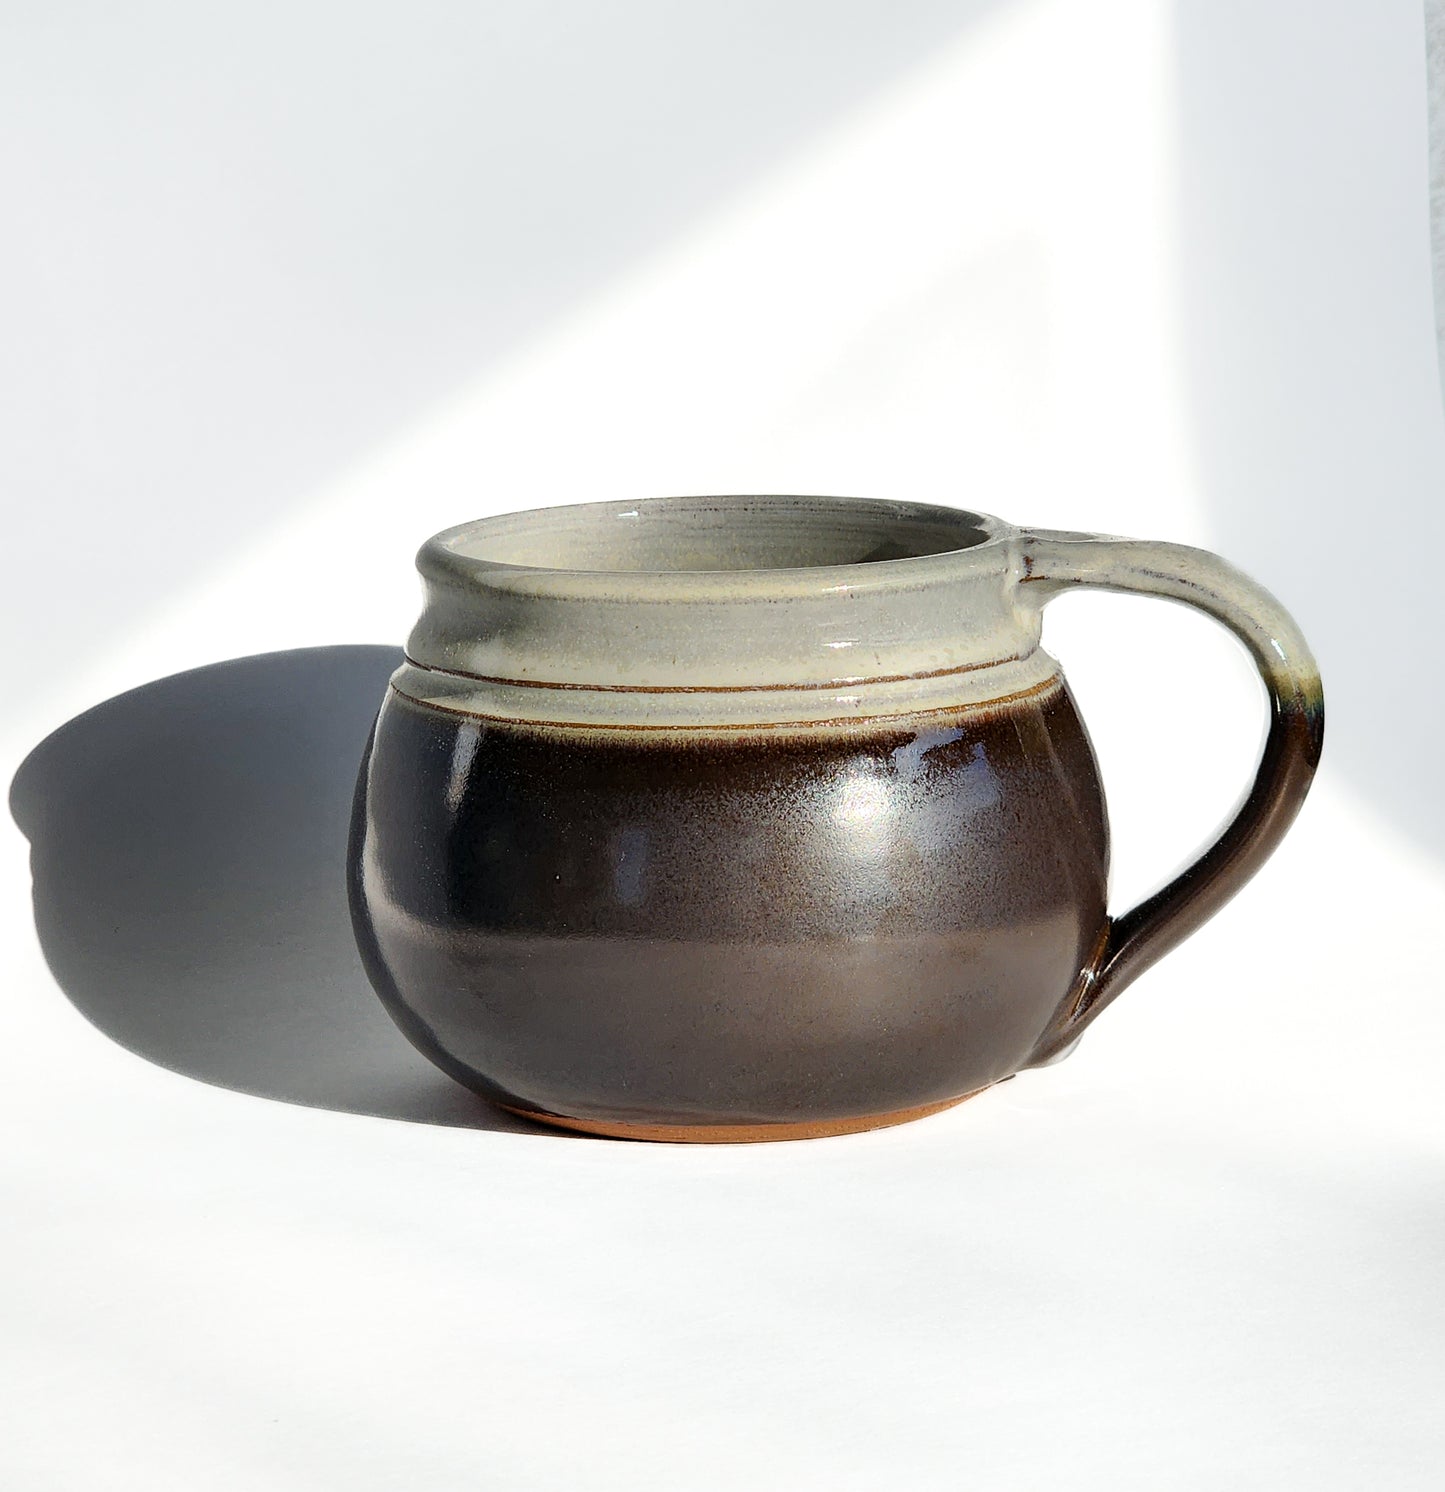 Image: Clinton Pottery's 24 oz Cereal/Soup Mug in Licorice – A bold and sophisticated choice for your kitchen, this machine washable mug seamlessly blends artistry with functionality. The deep Licorice color adds a touch of mystery, reminiscent of midnight skies and refined elegance. Perfect for savoring your favorite cereal or soup with a dash of dramatic flair.